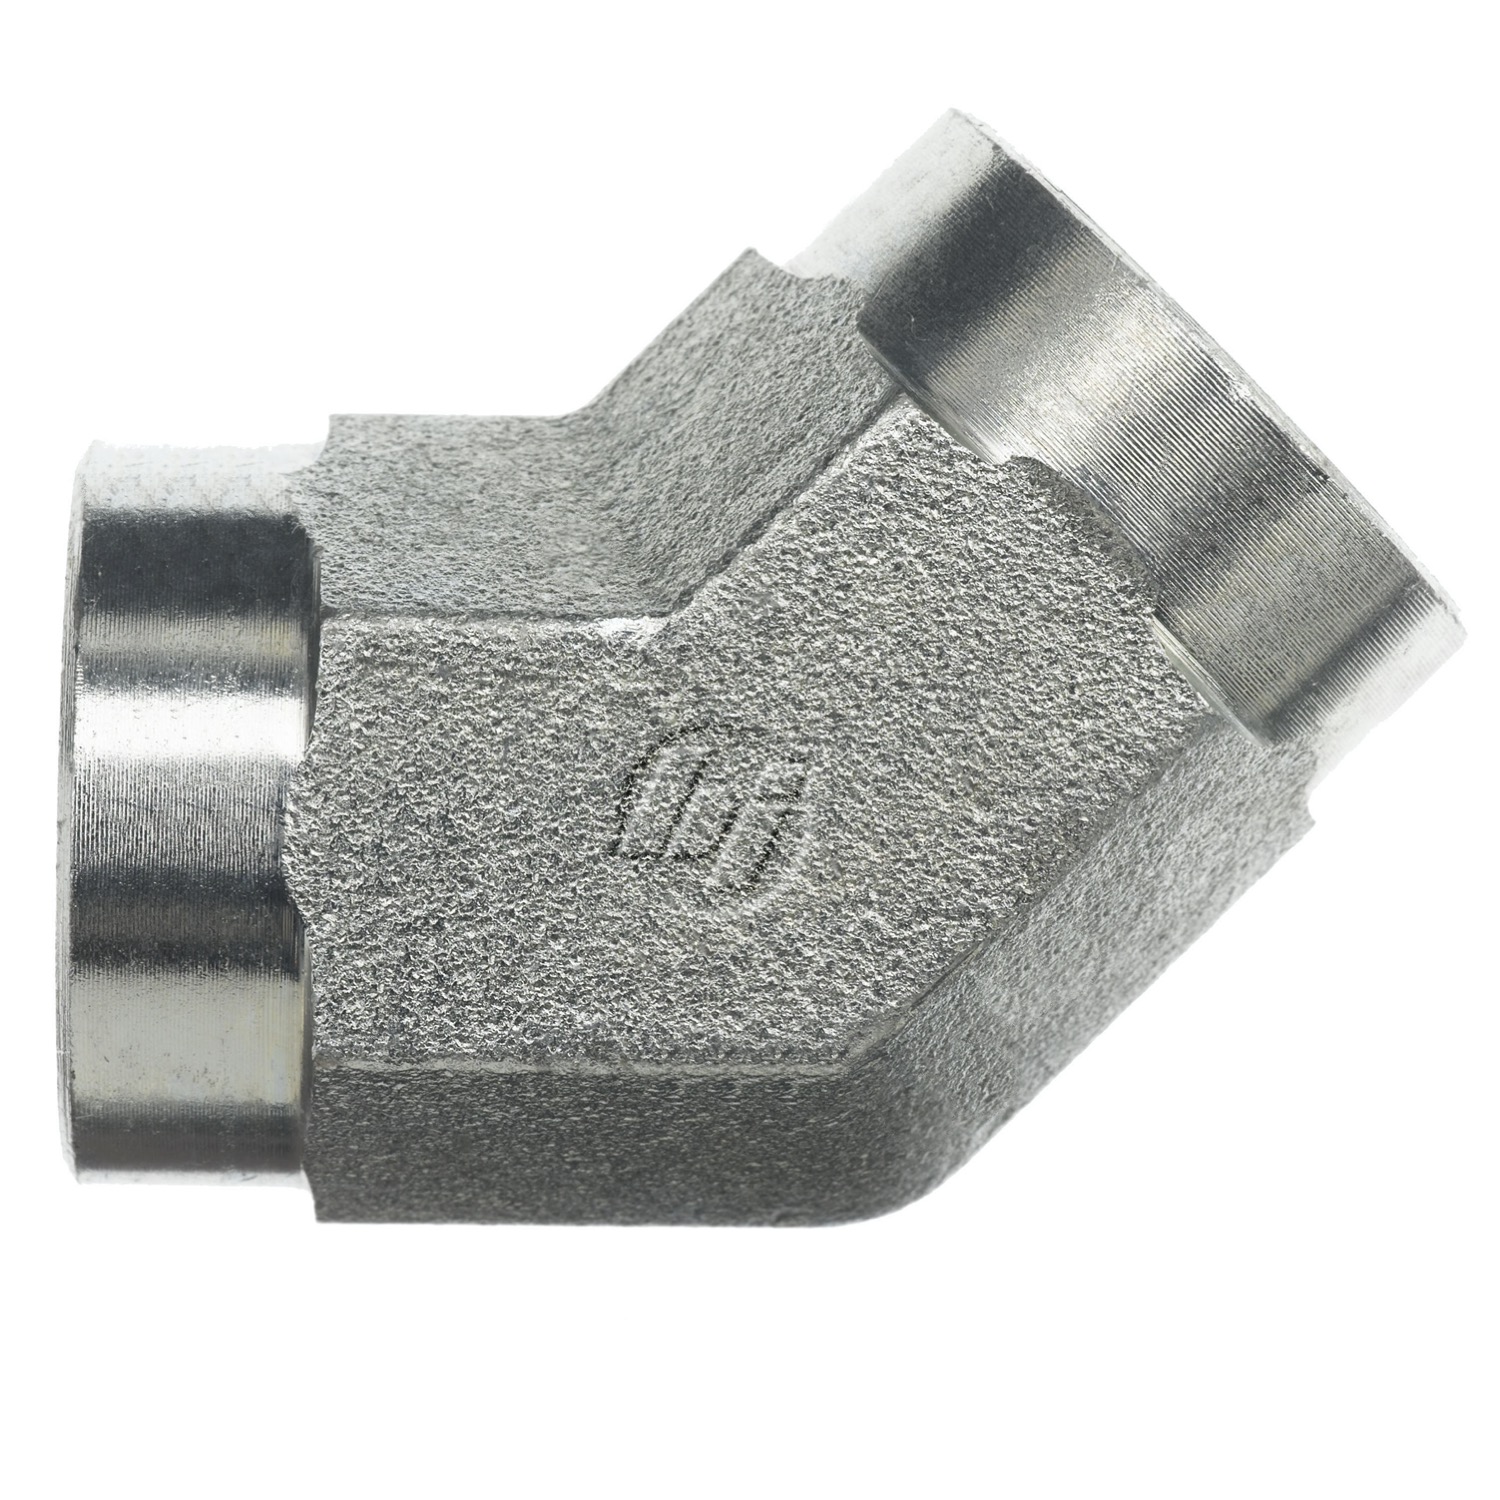 Hydraulic Hose Adapters - Elbow 45° Fitting, NPTF- 5505 Series